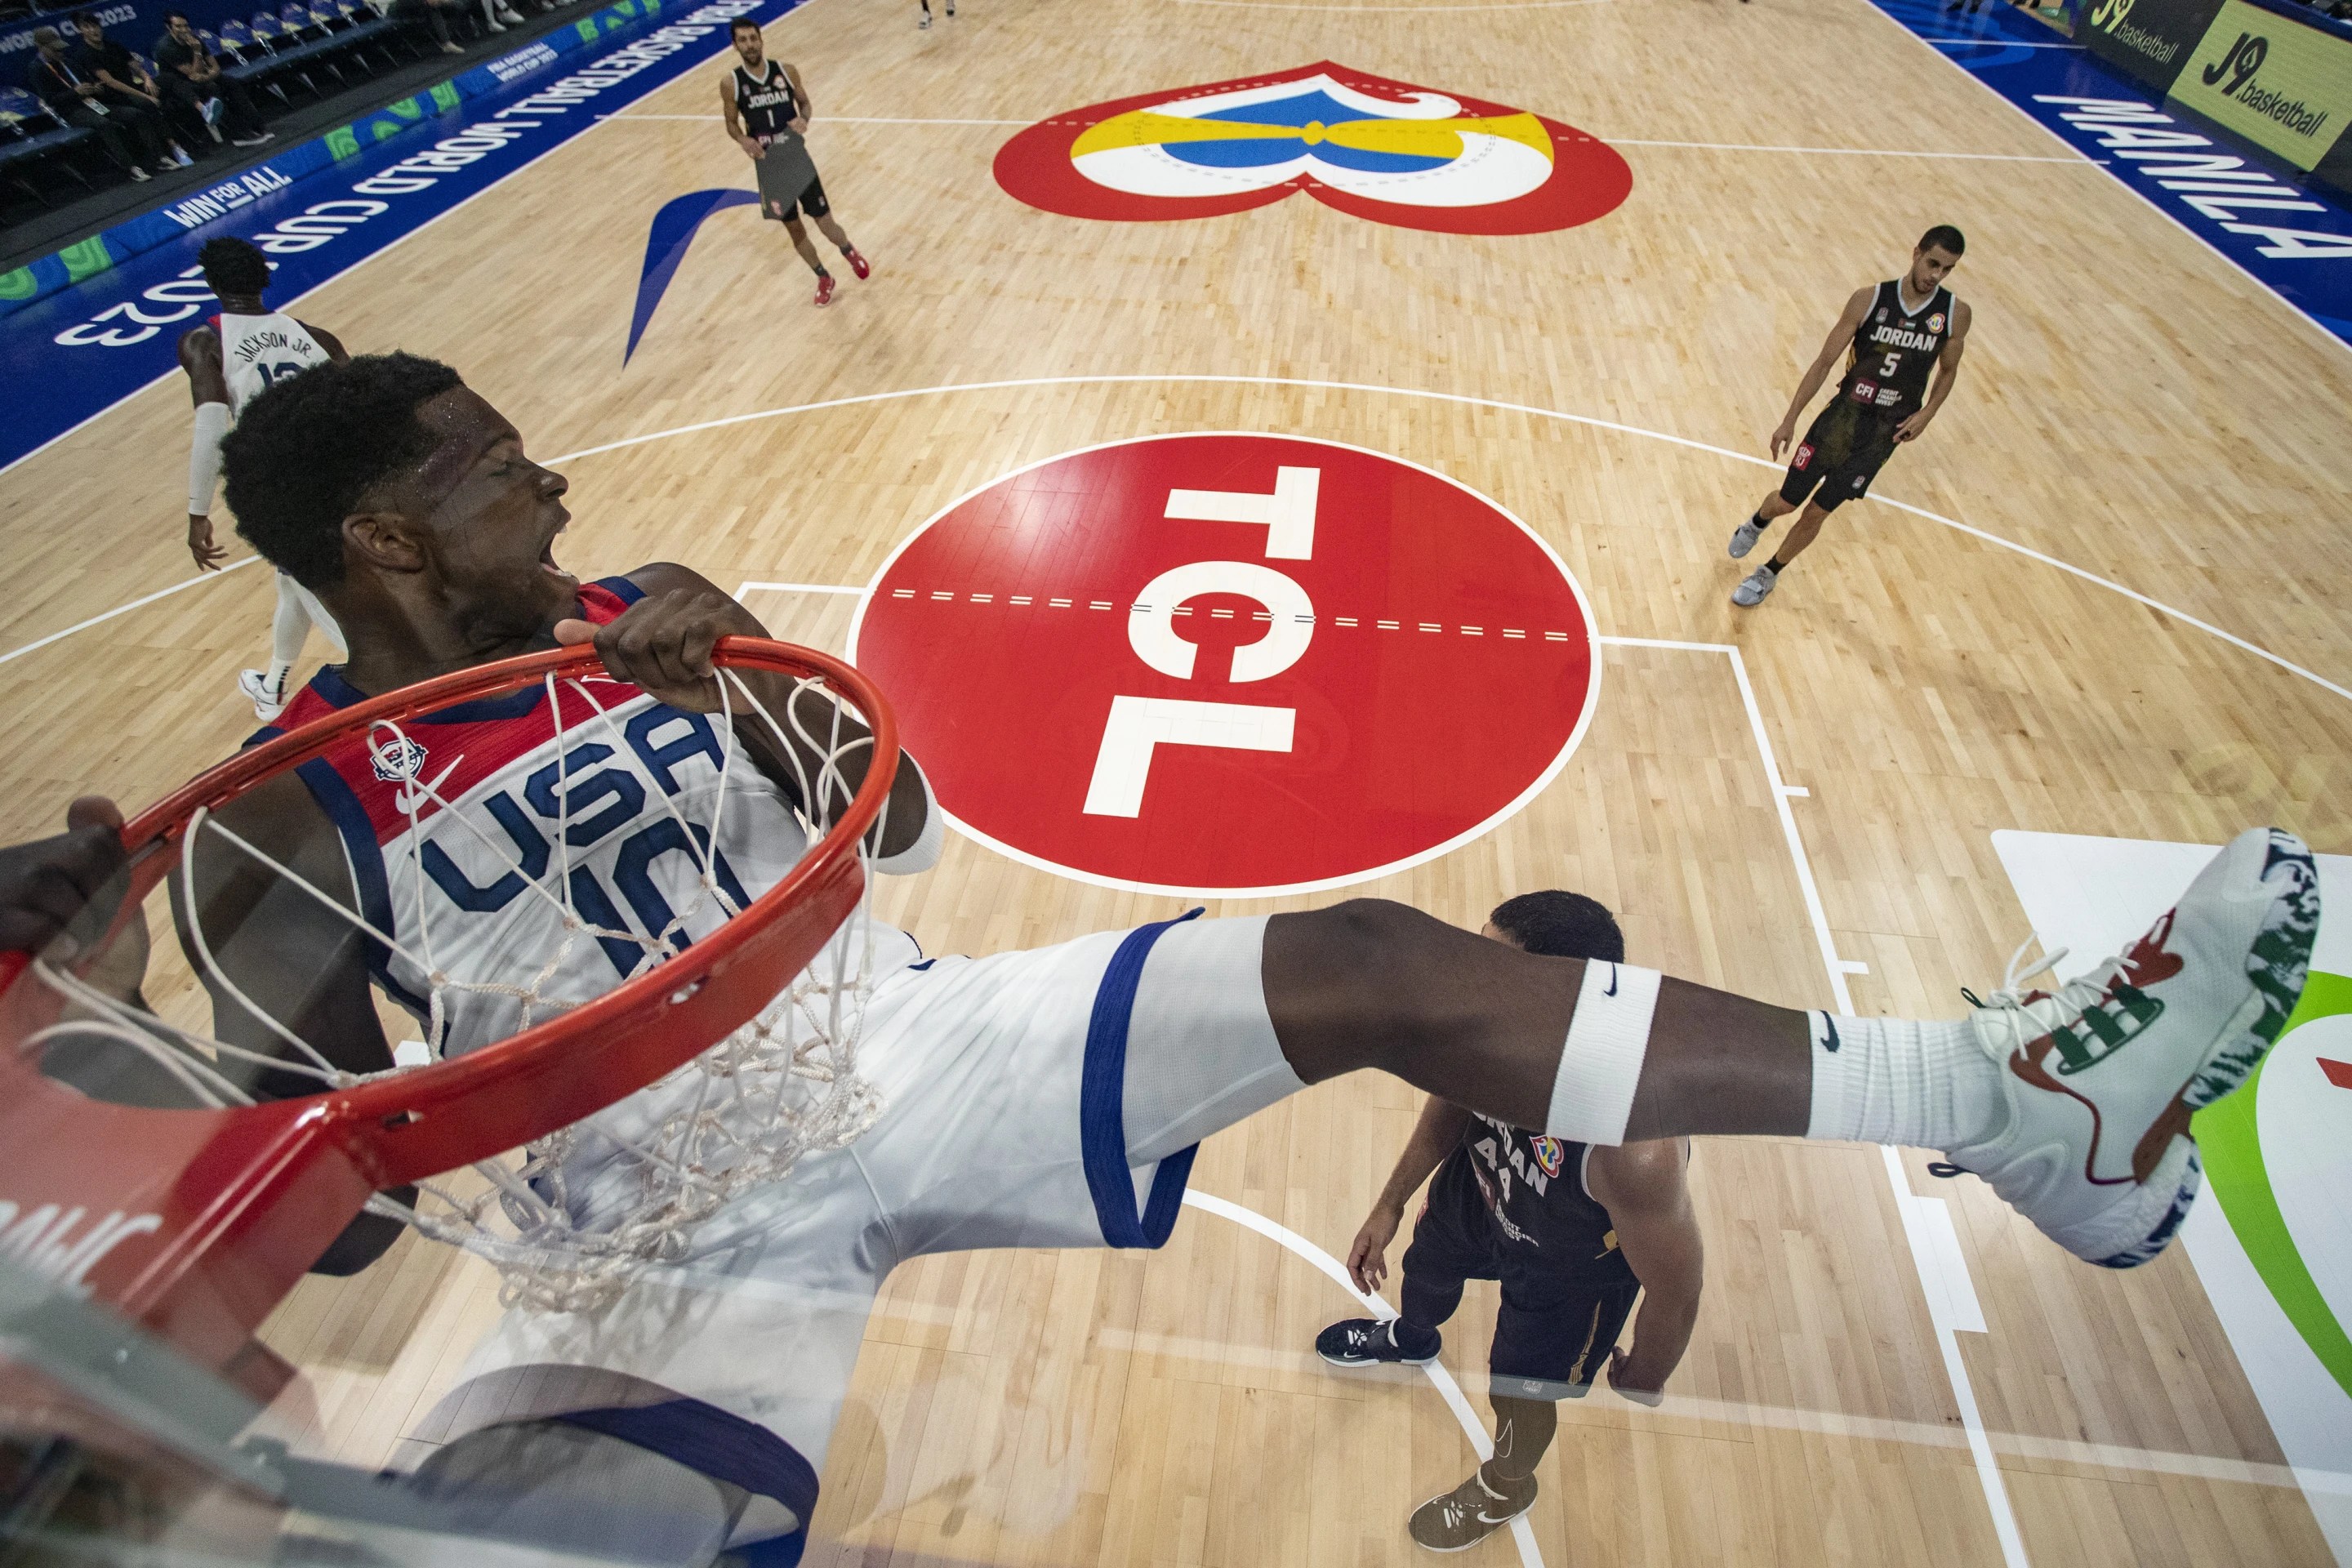 USA Basketball’s Anthony Edwards has tons of confidence at the World Cup